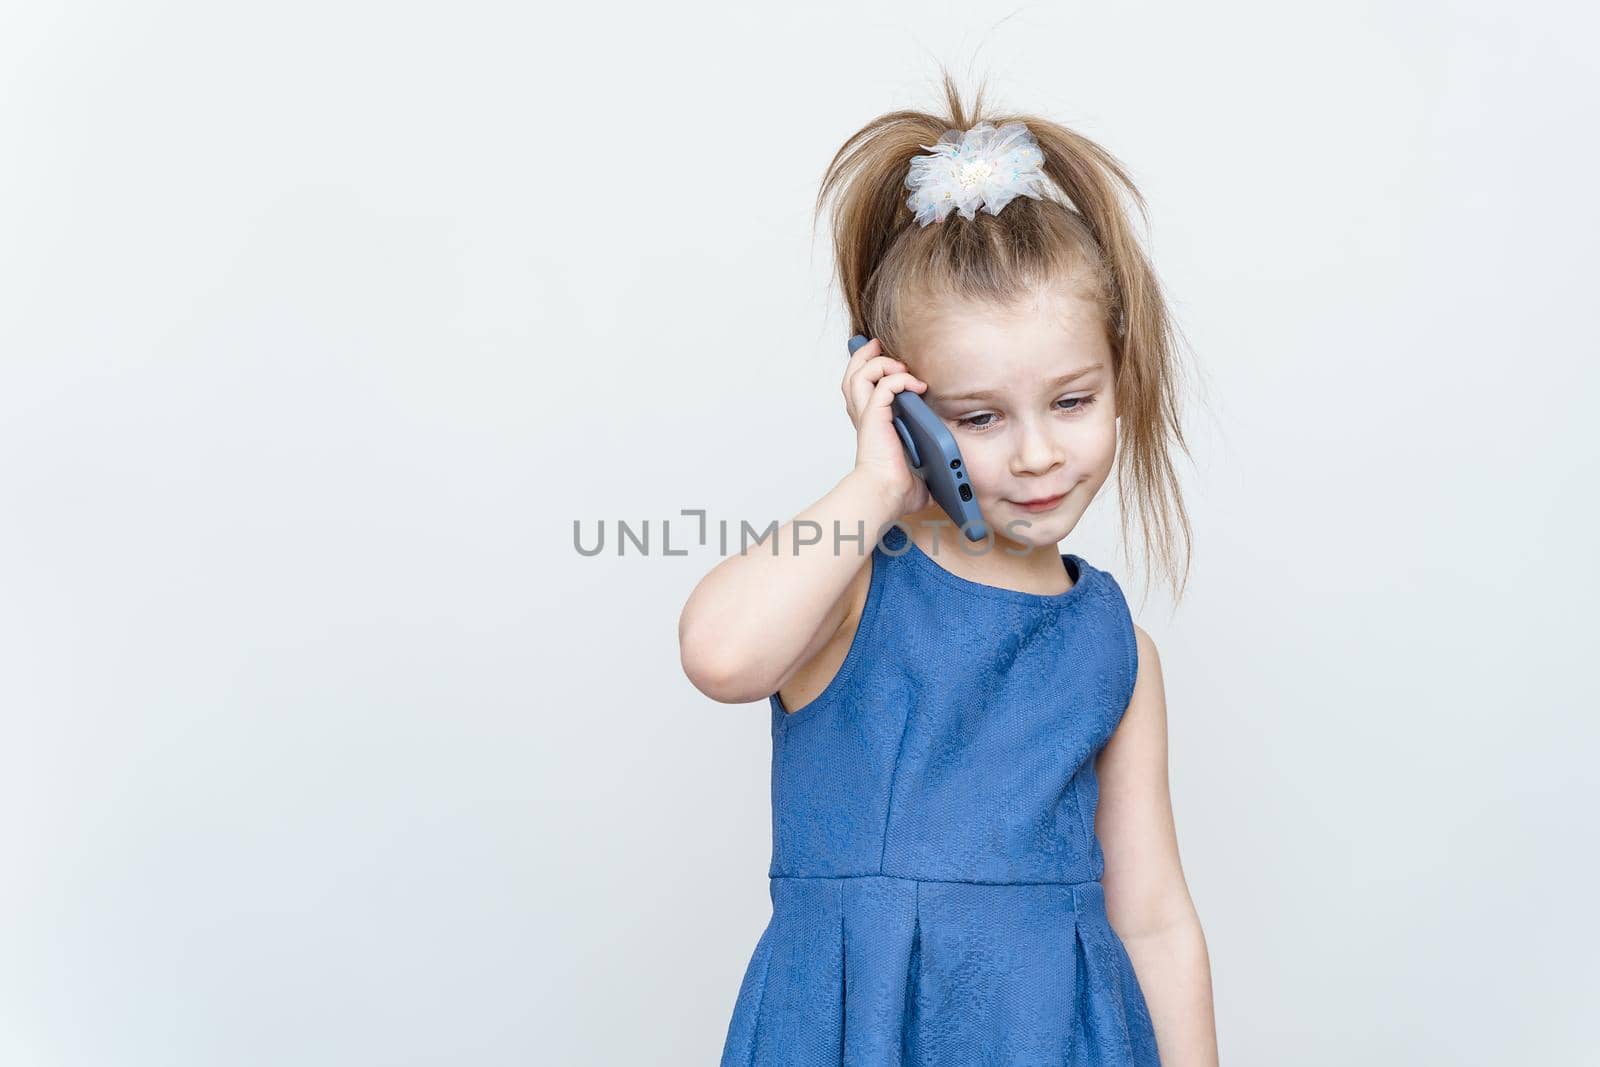 cute 5-6 year old girl in a blue dress posing in the studio with a smartphone